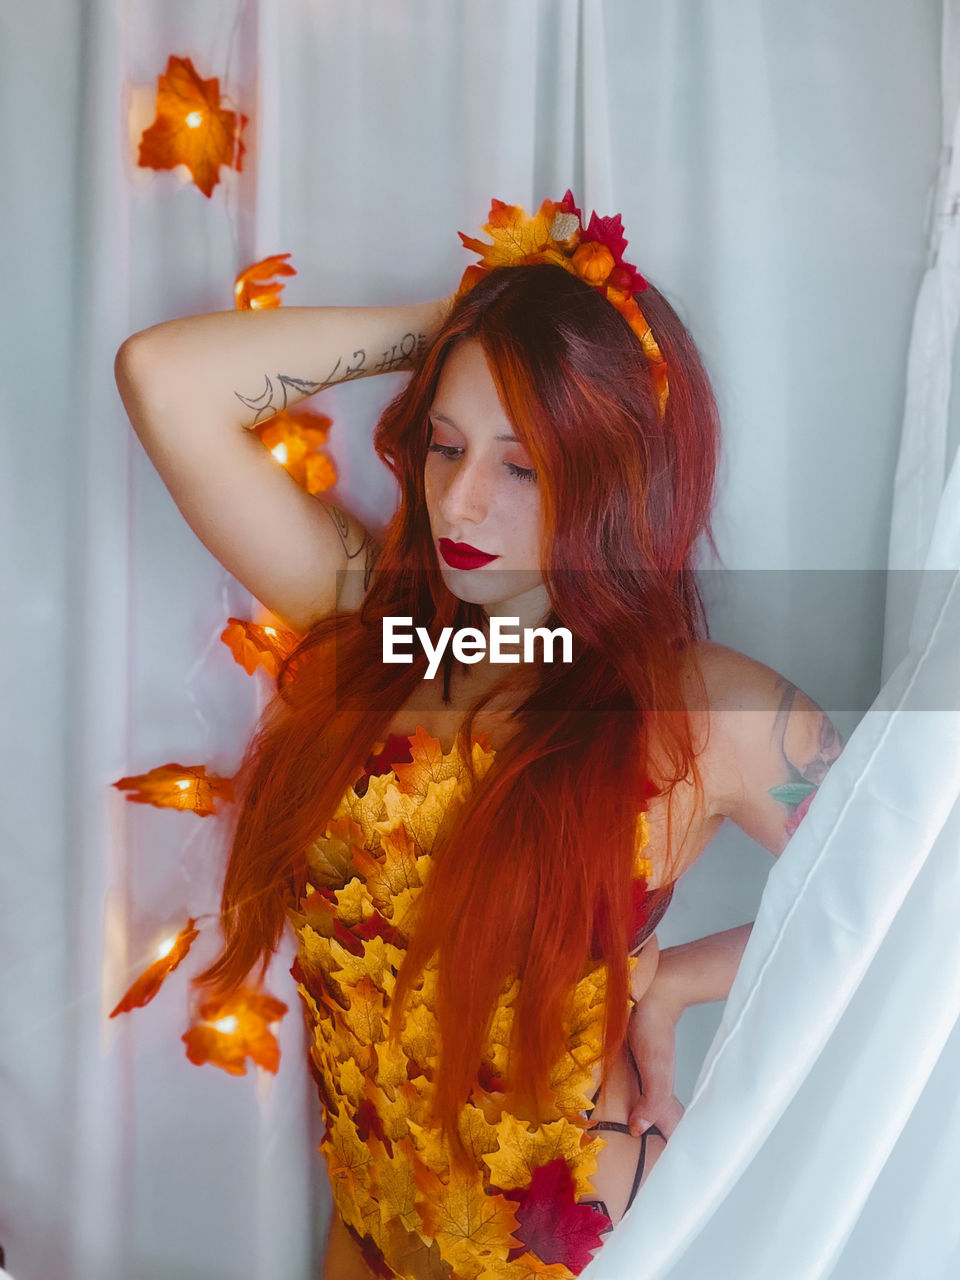 redhead, women, one person, adult, young adult, long hair, orange, dyed red hair, hairstyle, fashion, portrait, clothing, yellow, flower, celebration, indoors, costume, elegance, nature, flowering plant, dress, event, female, smiling, red, beauty in nature, bride, glamour, lifestyles, emotion, brown hair, looking at camera